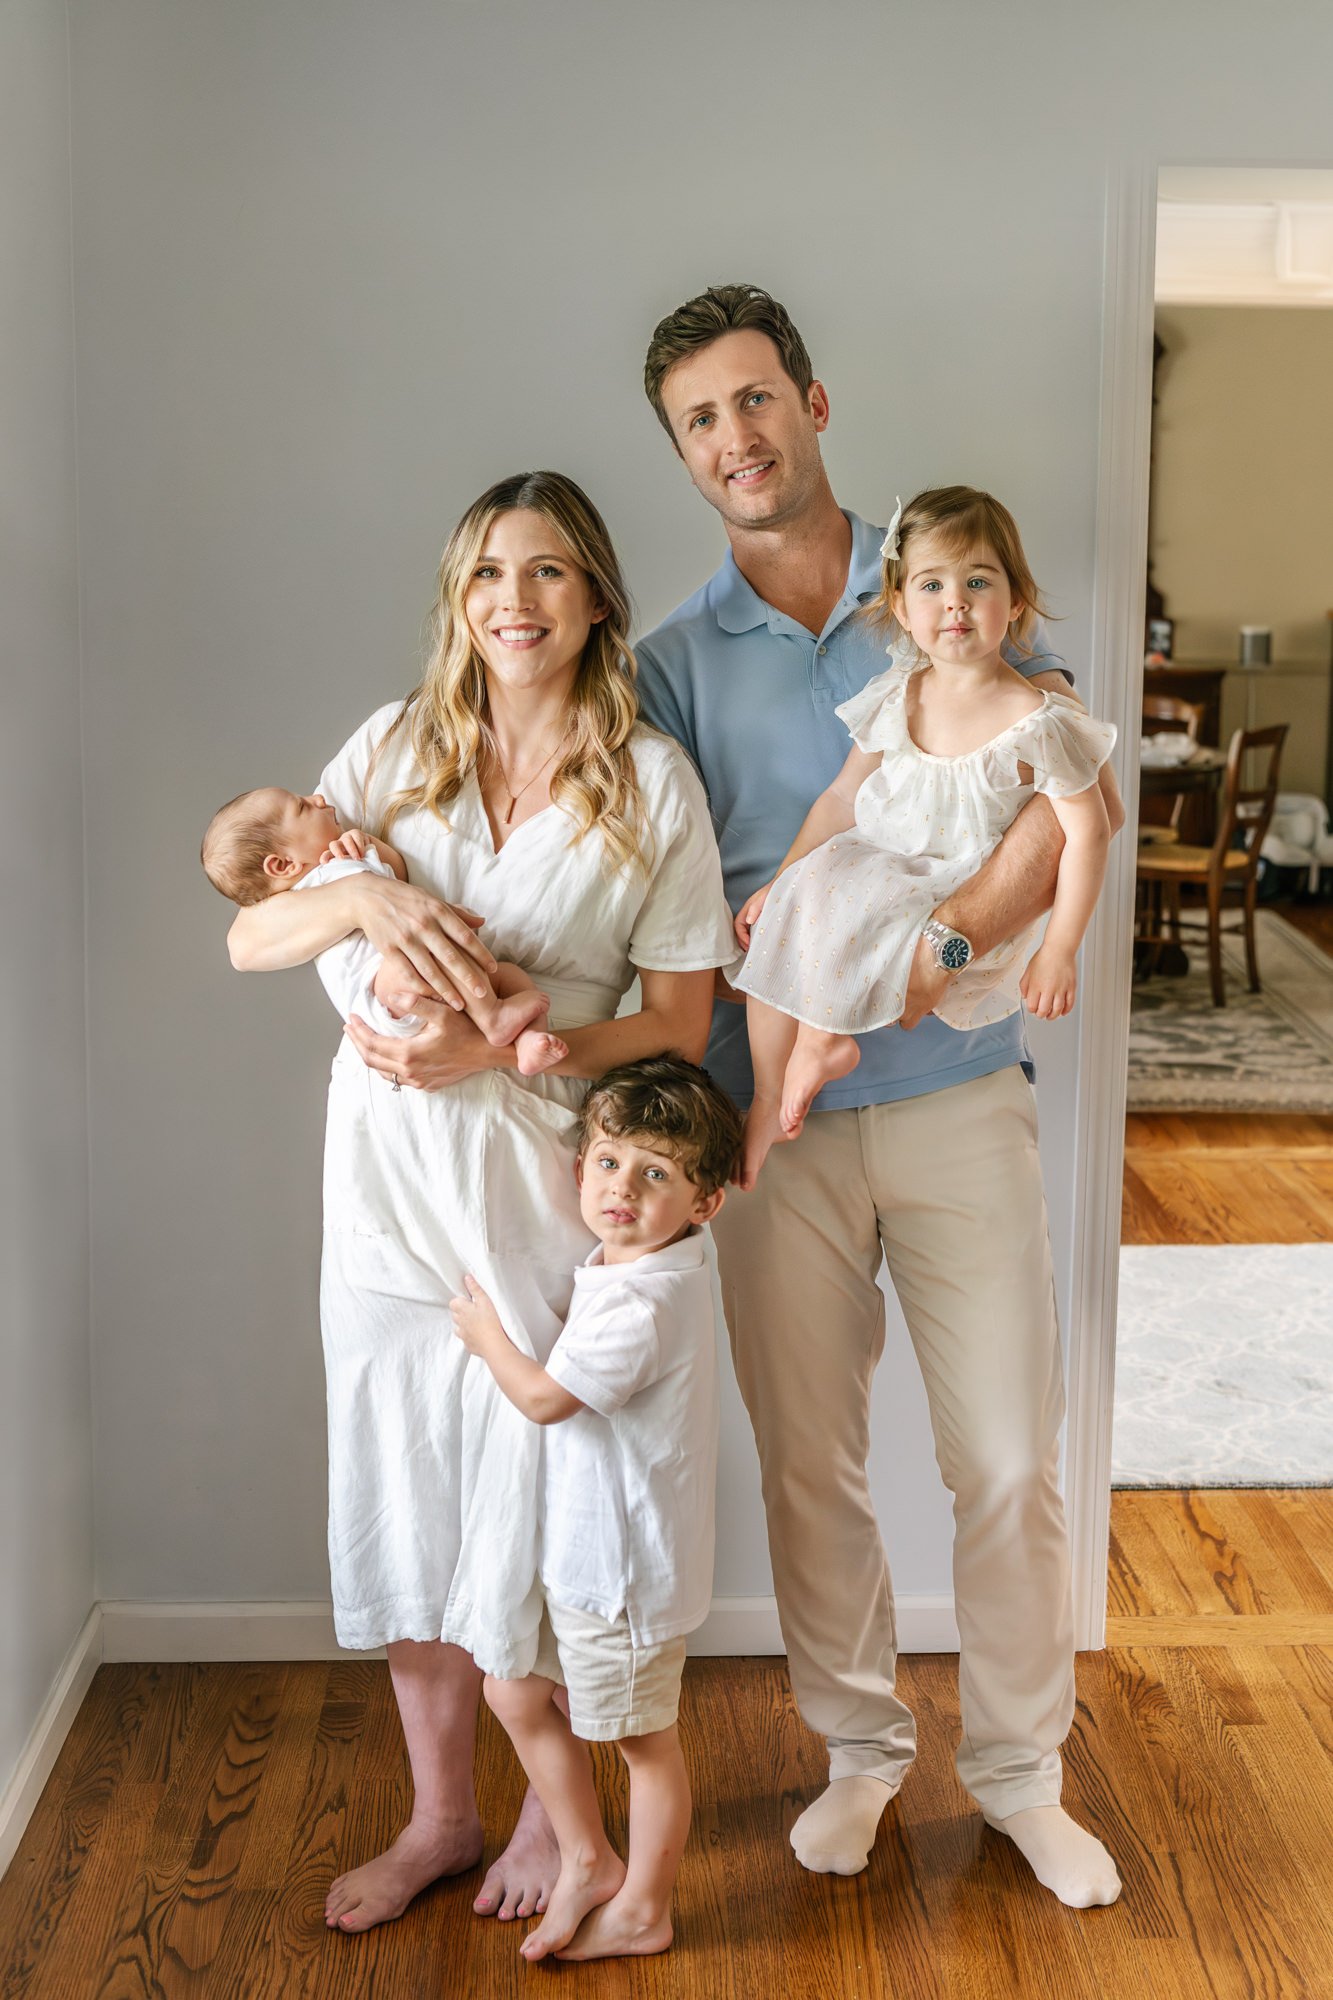  Family portraits featuring two happy parents with their three young children, including two toddlers and one newborn son. #candidposeinspo #newbornphotography #shorthillsphotographer #familyphotographersinnewjersey #inhomeportraits #newbornposeinspi